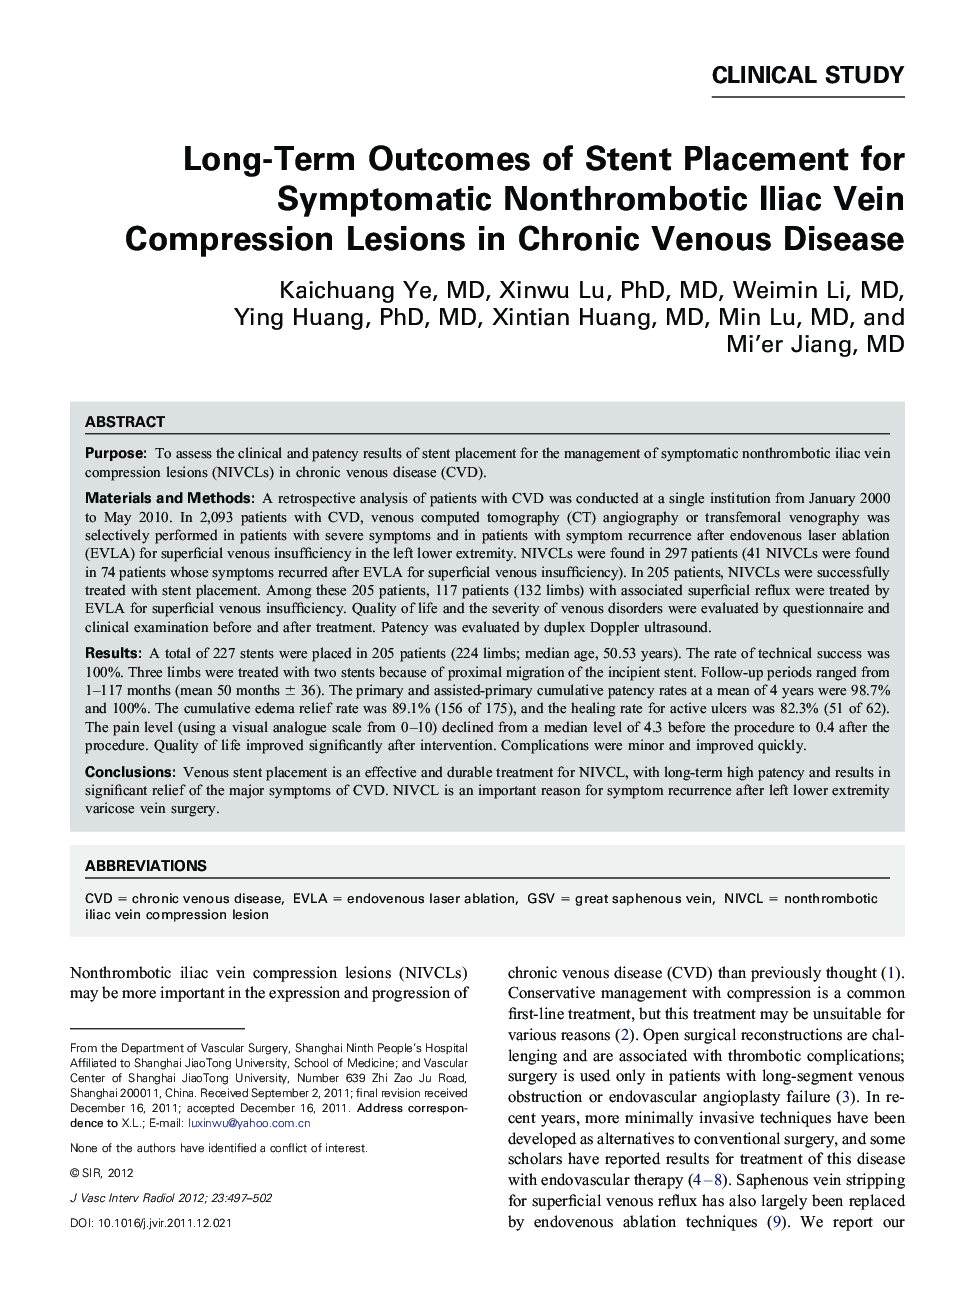 Long-Term Outcomes of Stent Placement for Symptomatic Nonthrombotic Iliac Vein Compression Lesions in Chronic Venous Disease